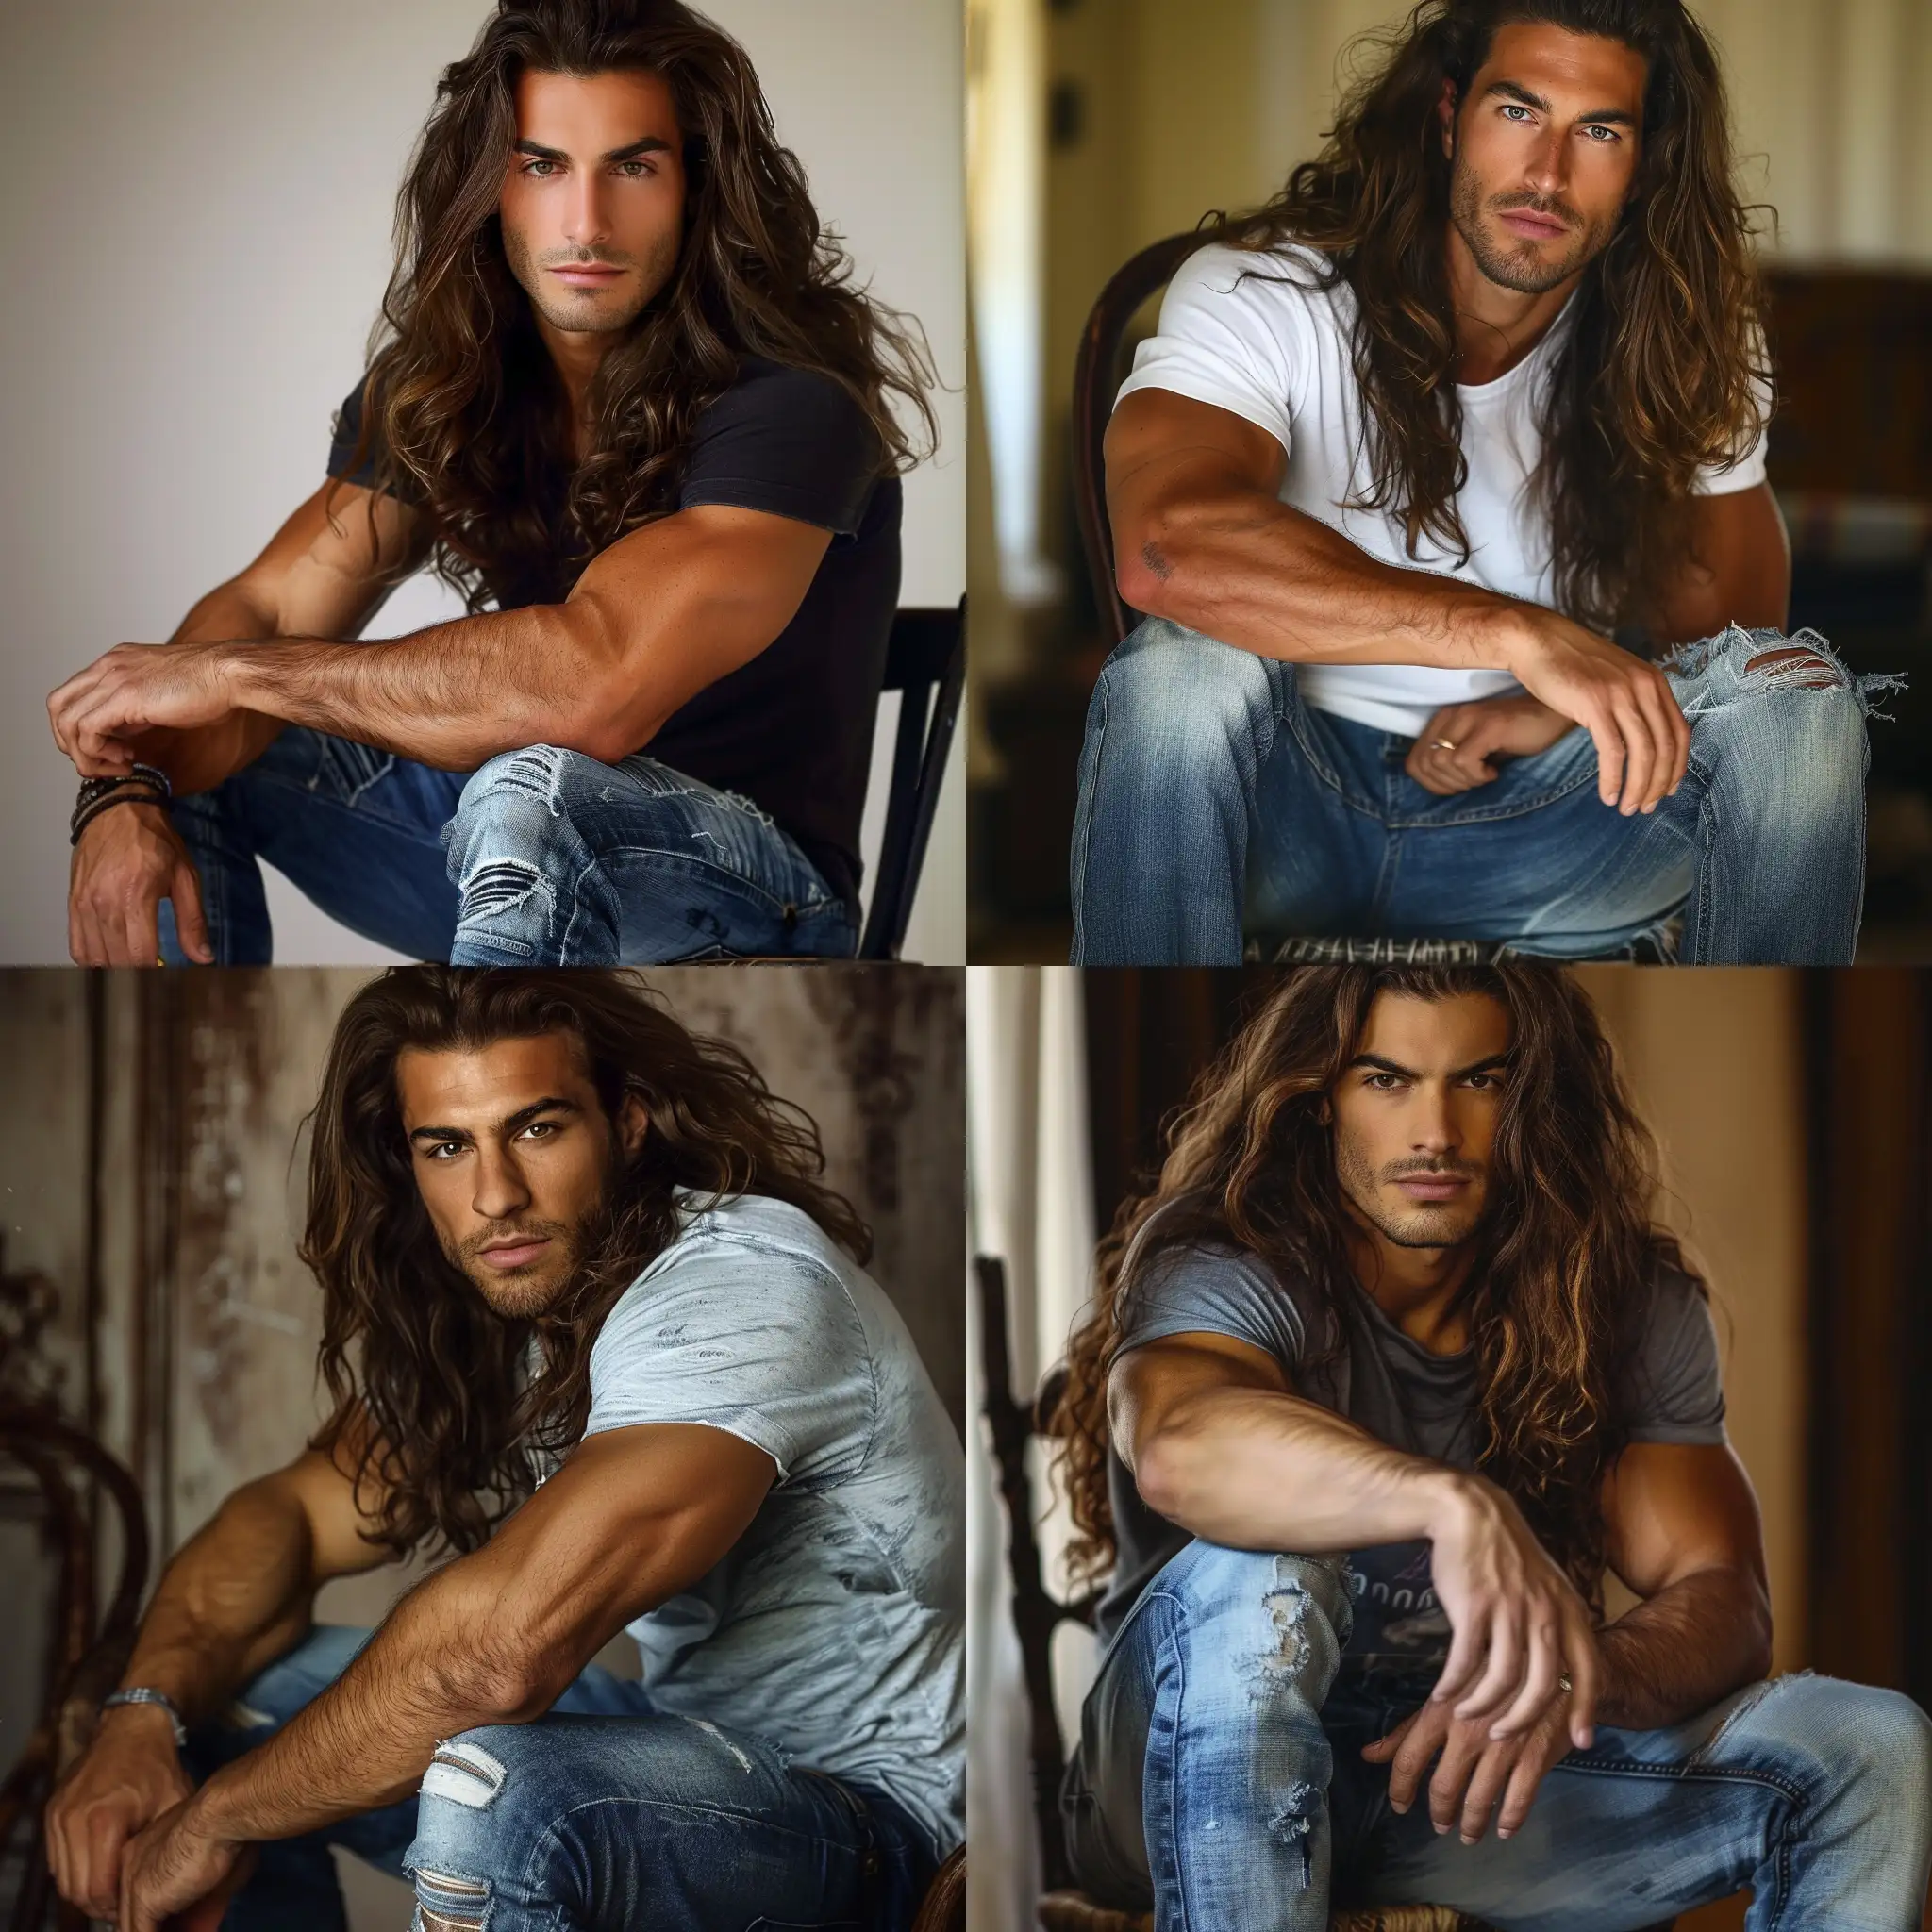 Muscular-Greek-Man-Relaxing-on-Chair-in-Casual-Attire